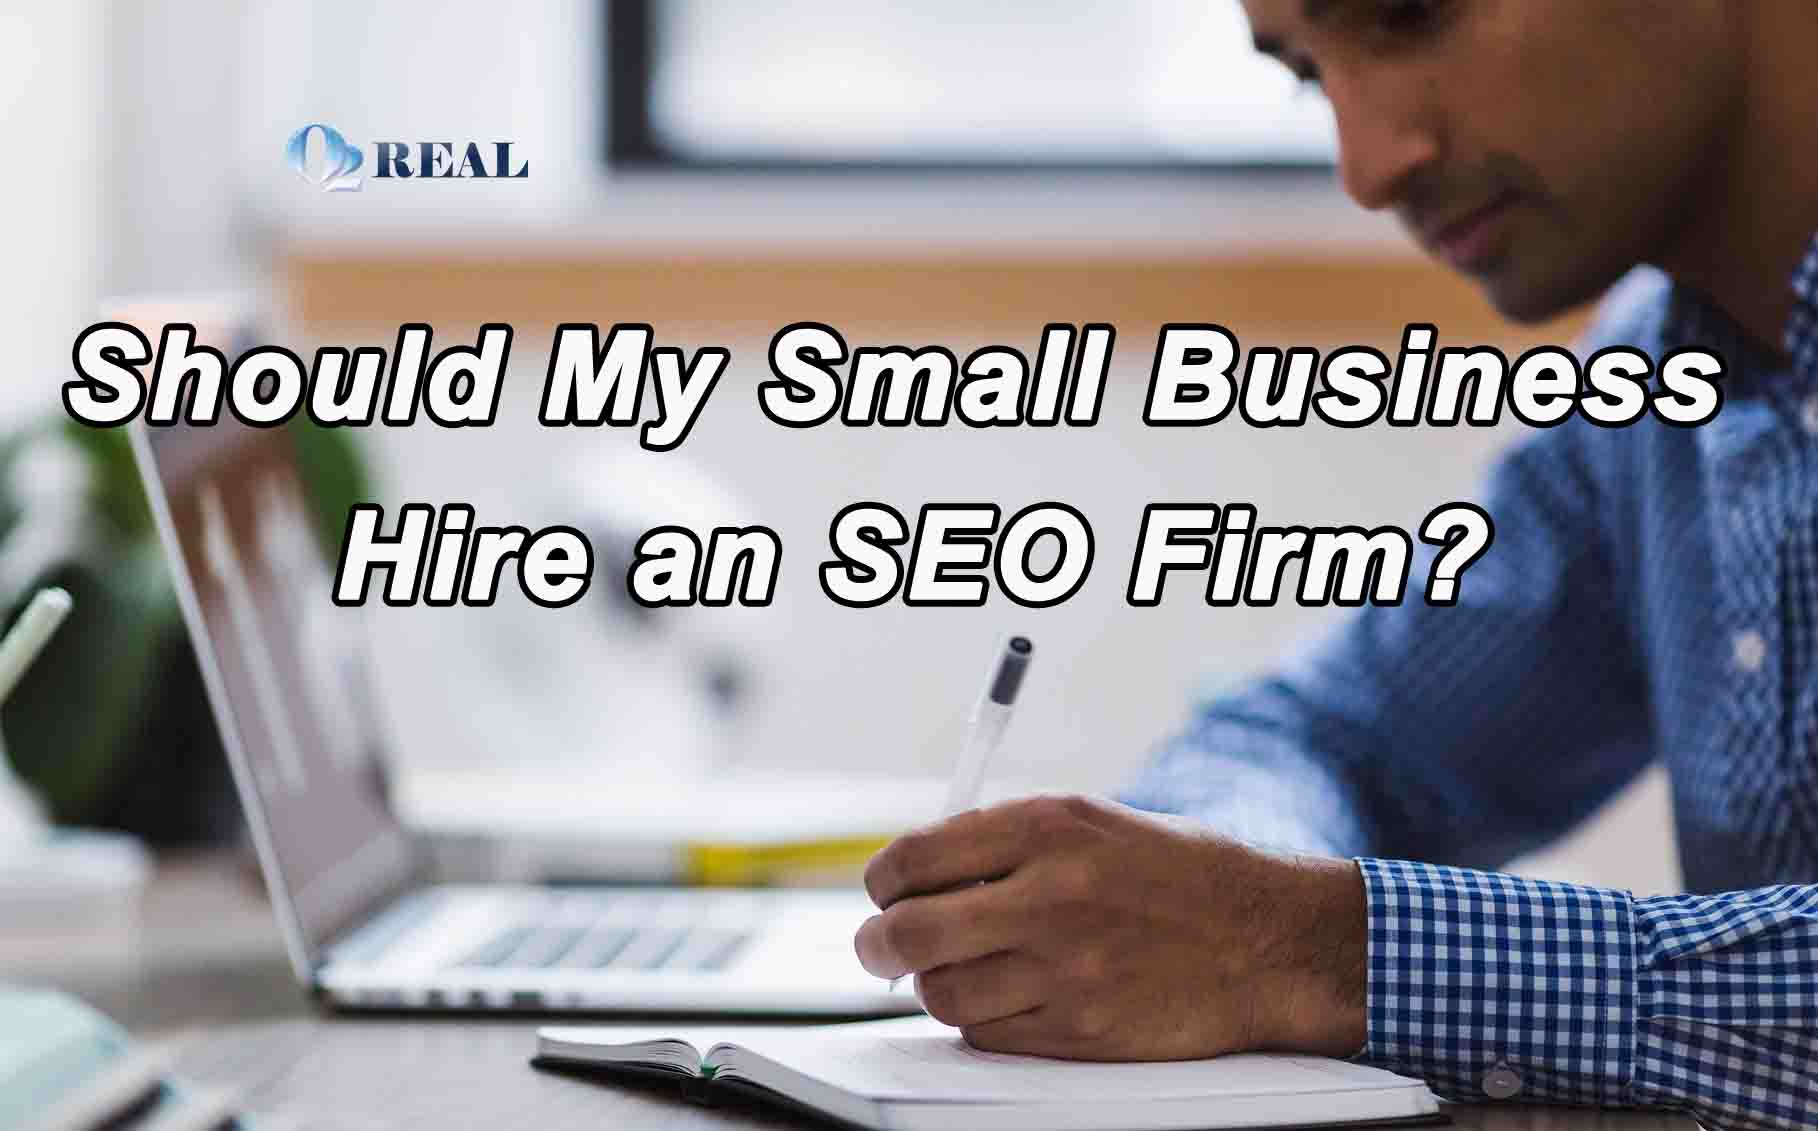 Should My Small Business Hire an SEO Firm?